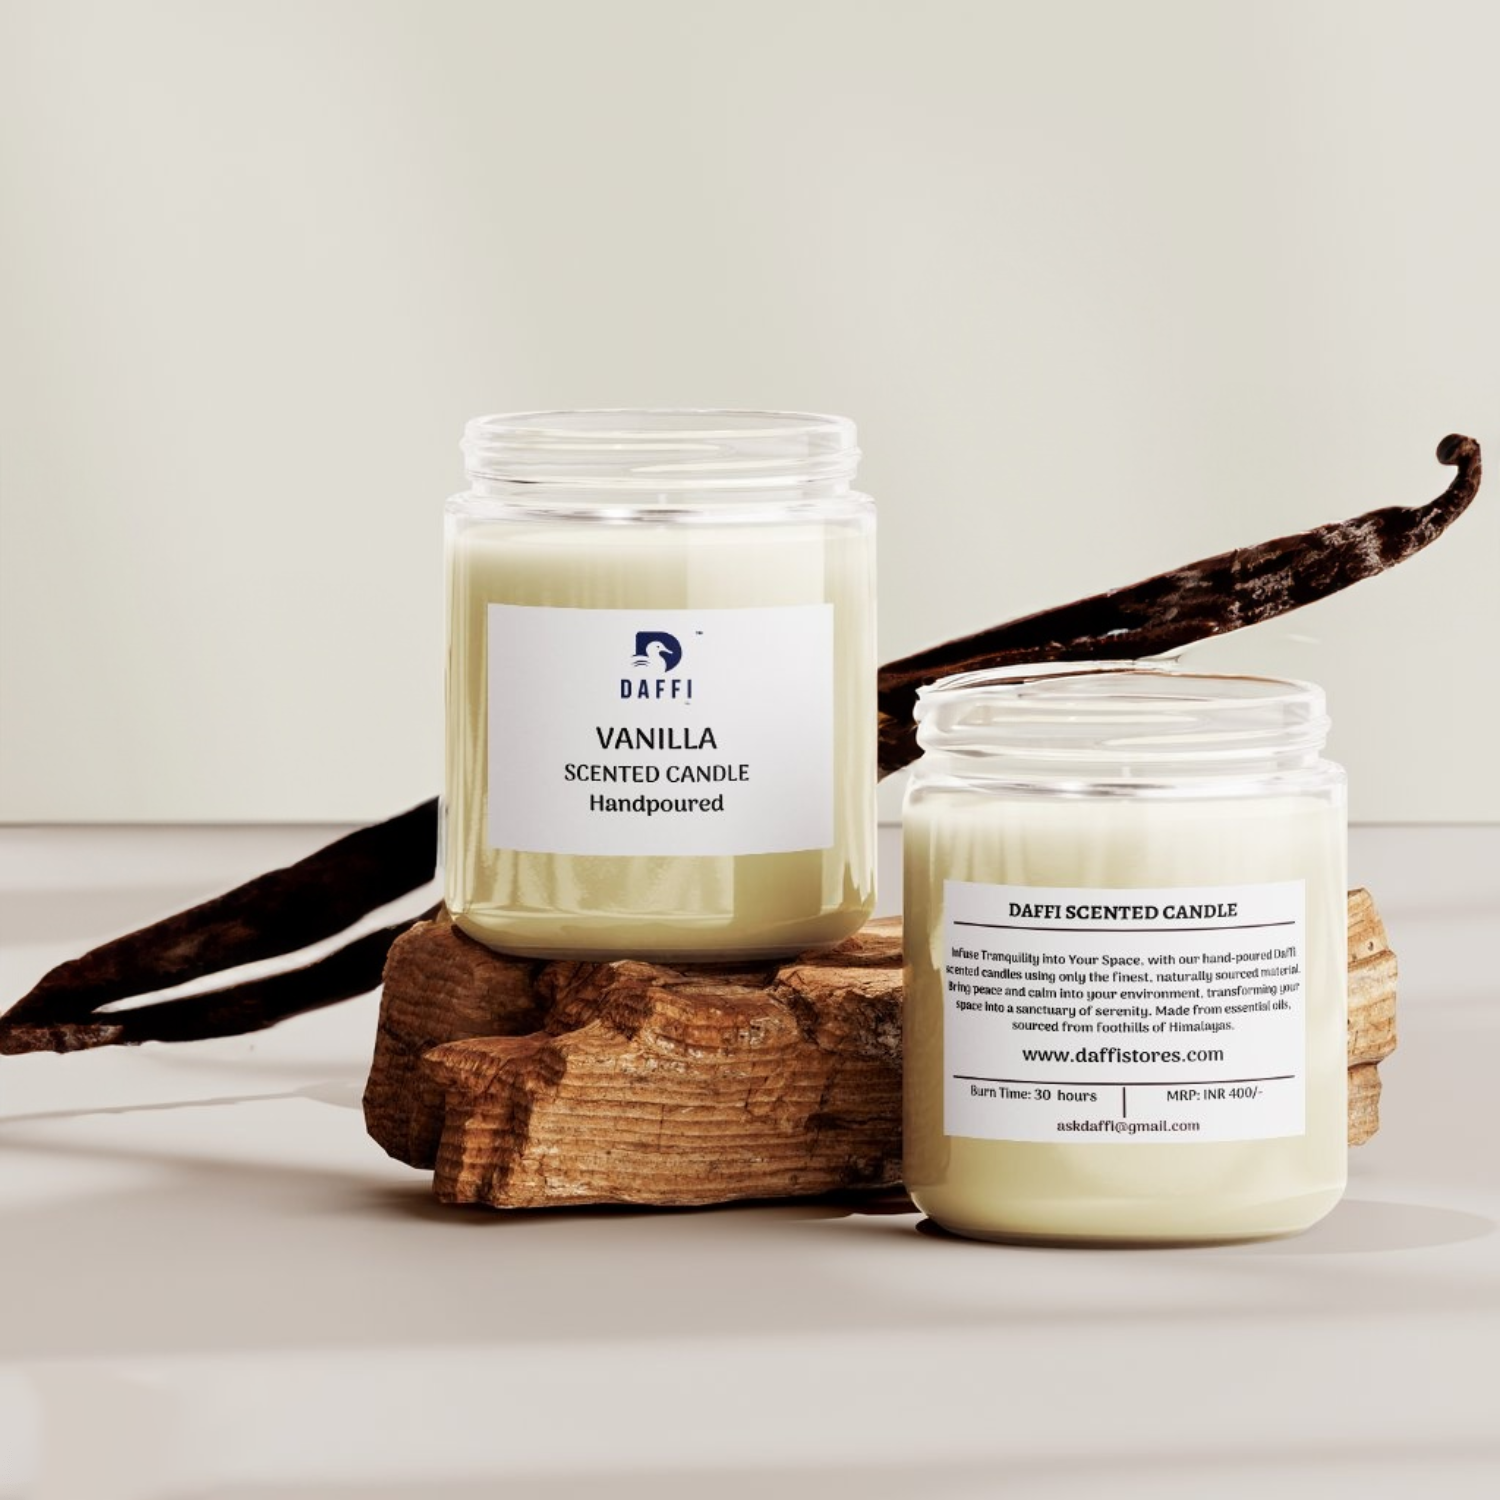 Illuminate Your Space with Exquisite Scented Candles